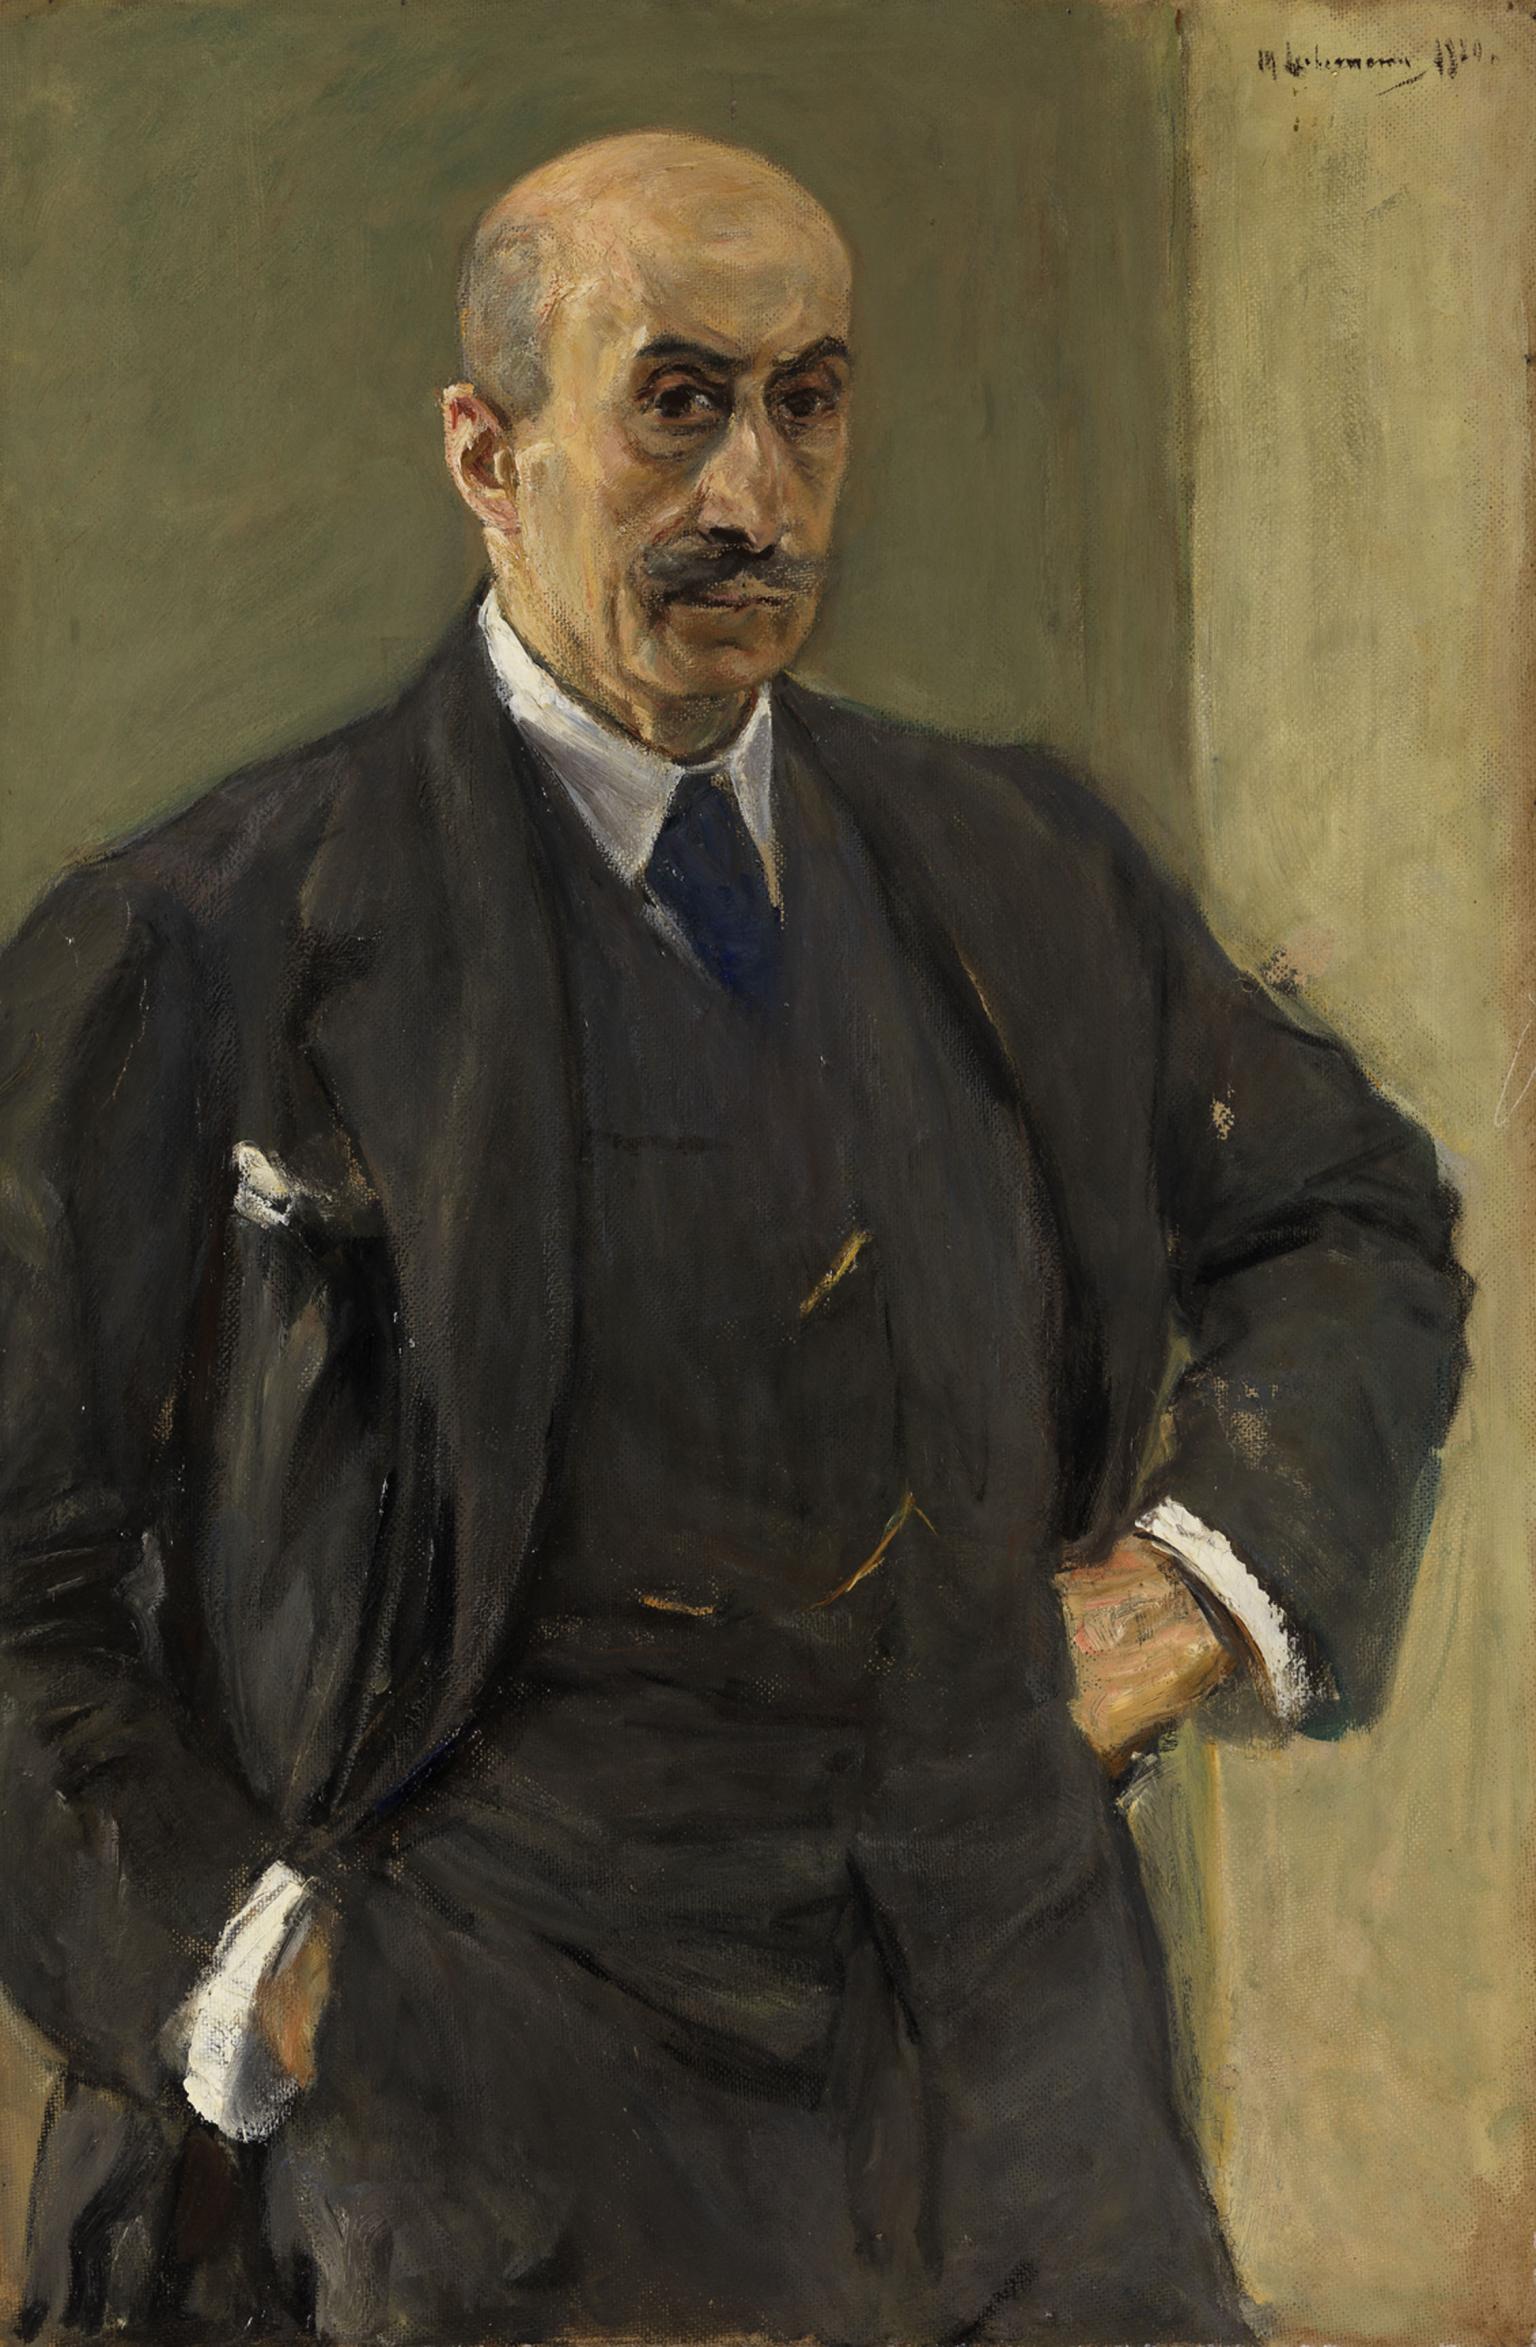 Full body portrait painting of man dressed in a suit with right hand in pocket and left hand on hip.